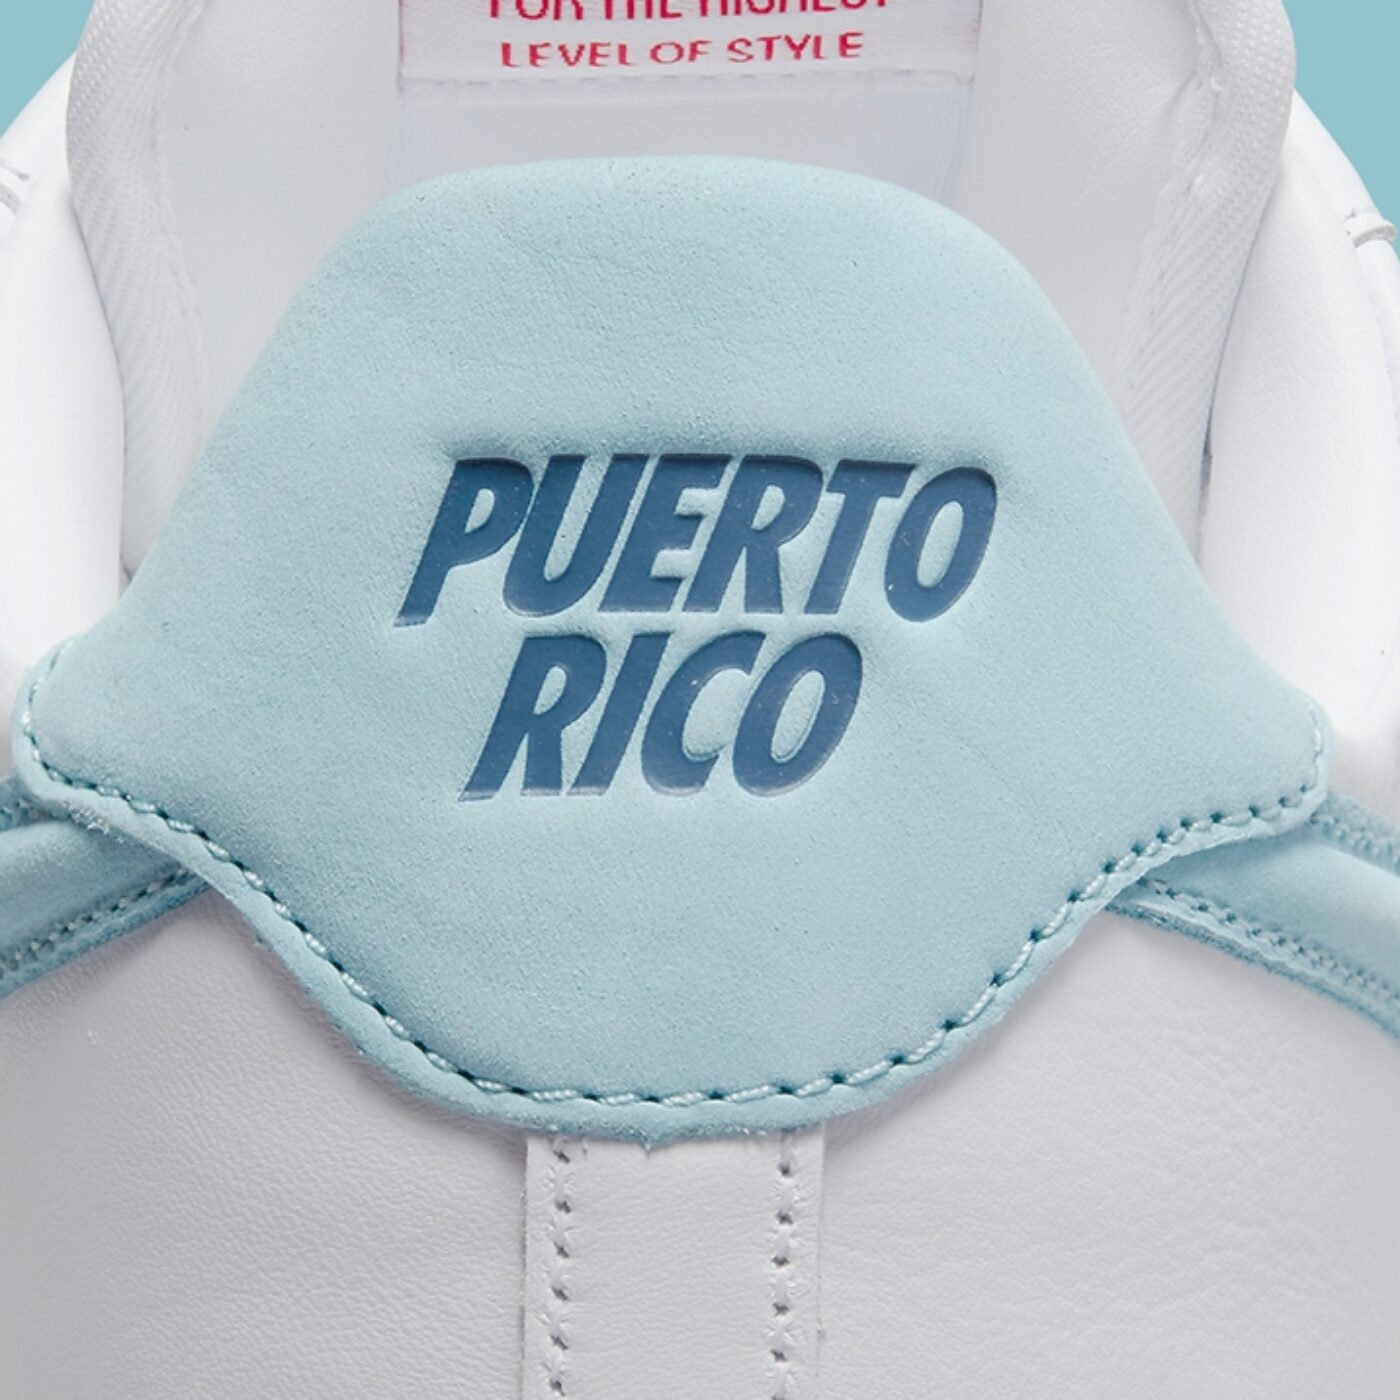 Here’s a First Look at Nike’s ‘Puerto Rico’ Sneakers Before ReRelease